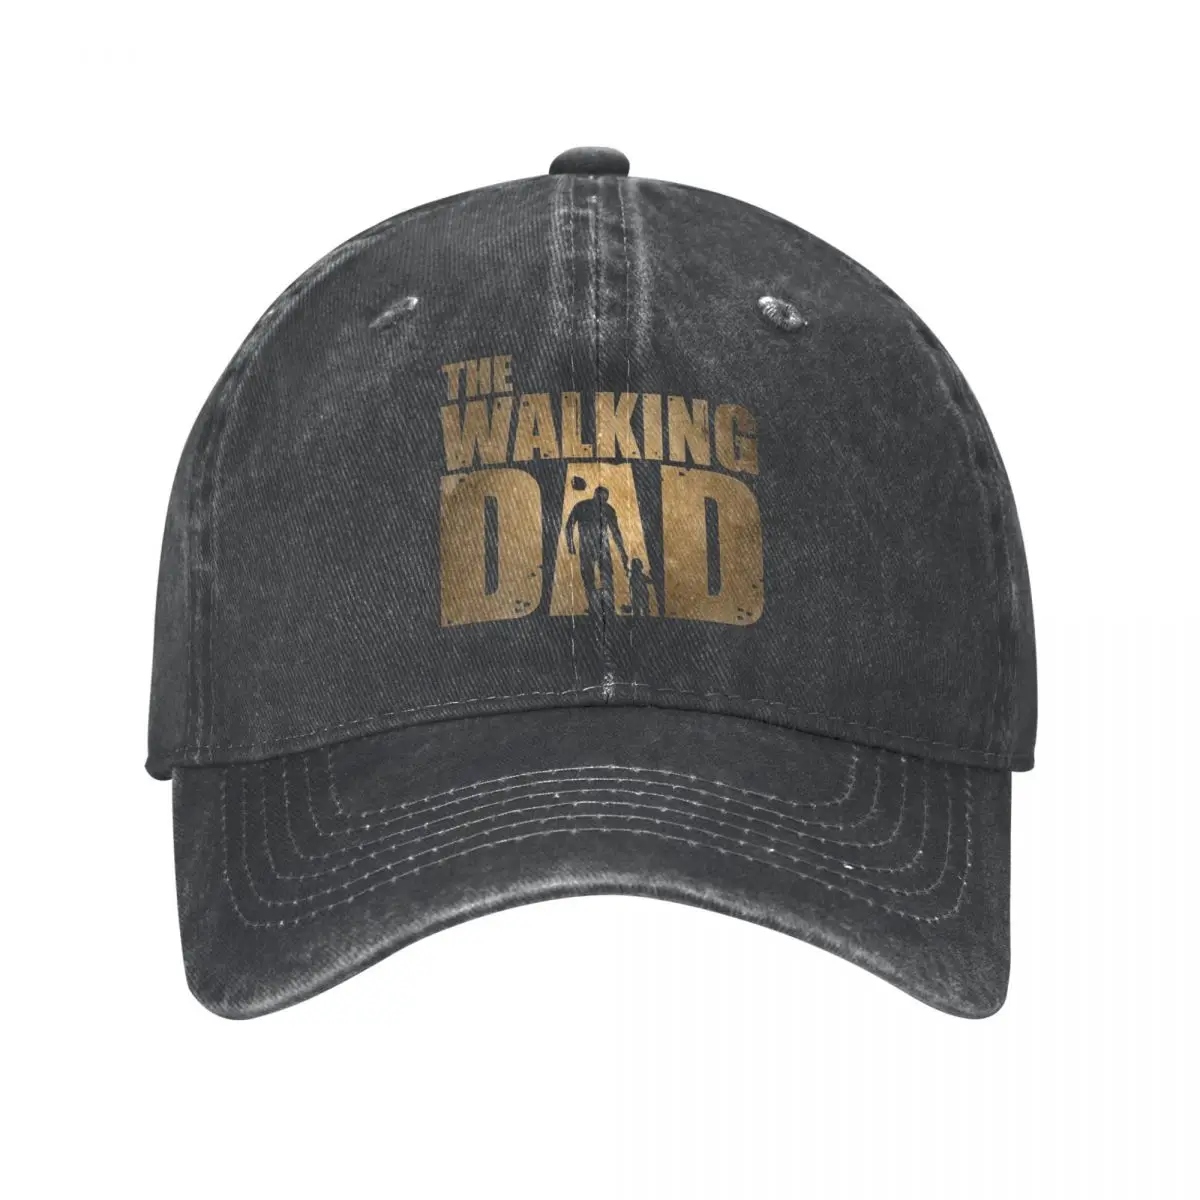 

The Walking Dad Father'Day Style Baseball Cap Hip Hop Distressed Cotton Hats Cap Vintage Outdoor Activities Gift Snapback Hat